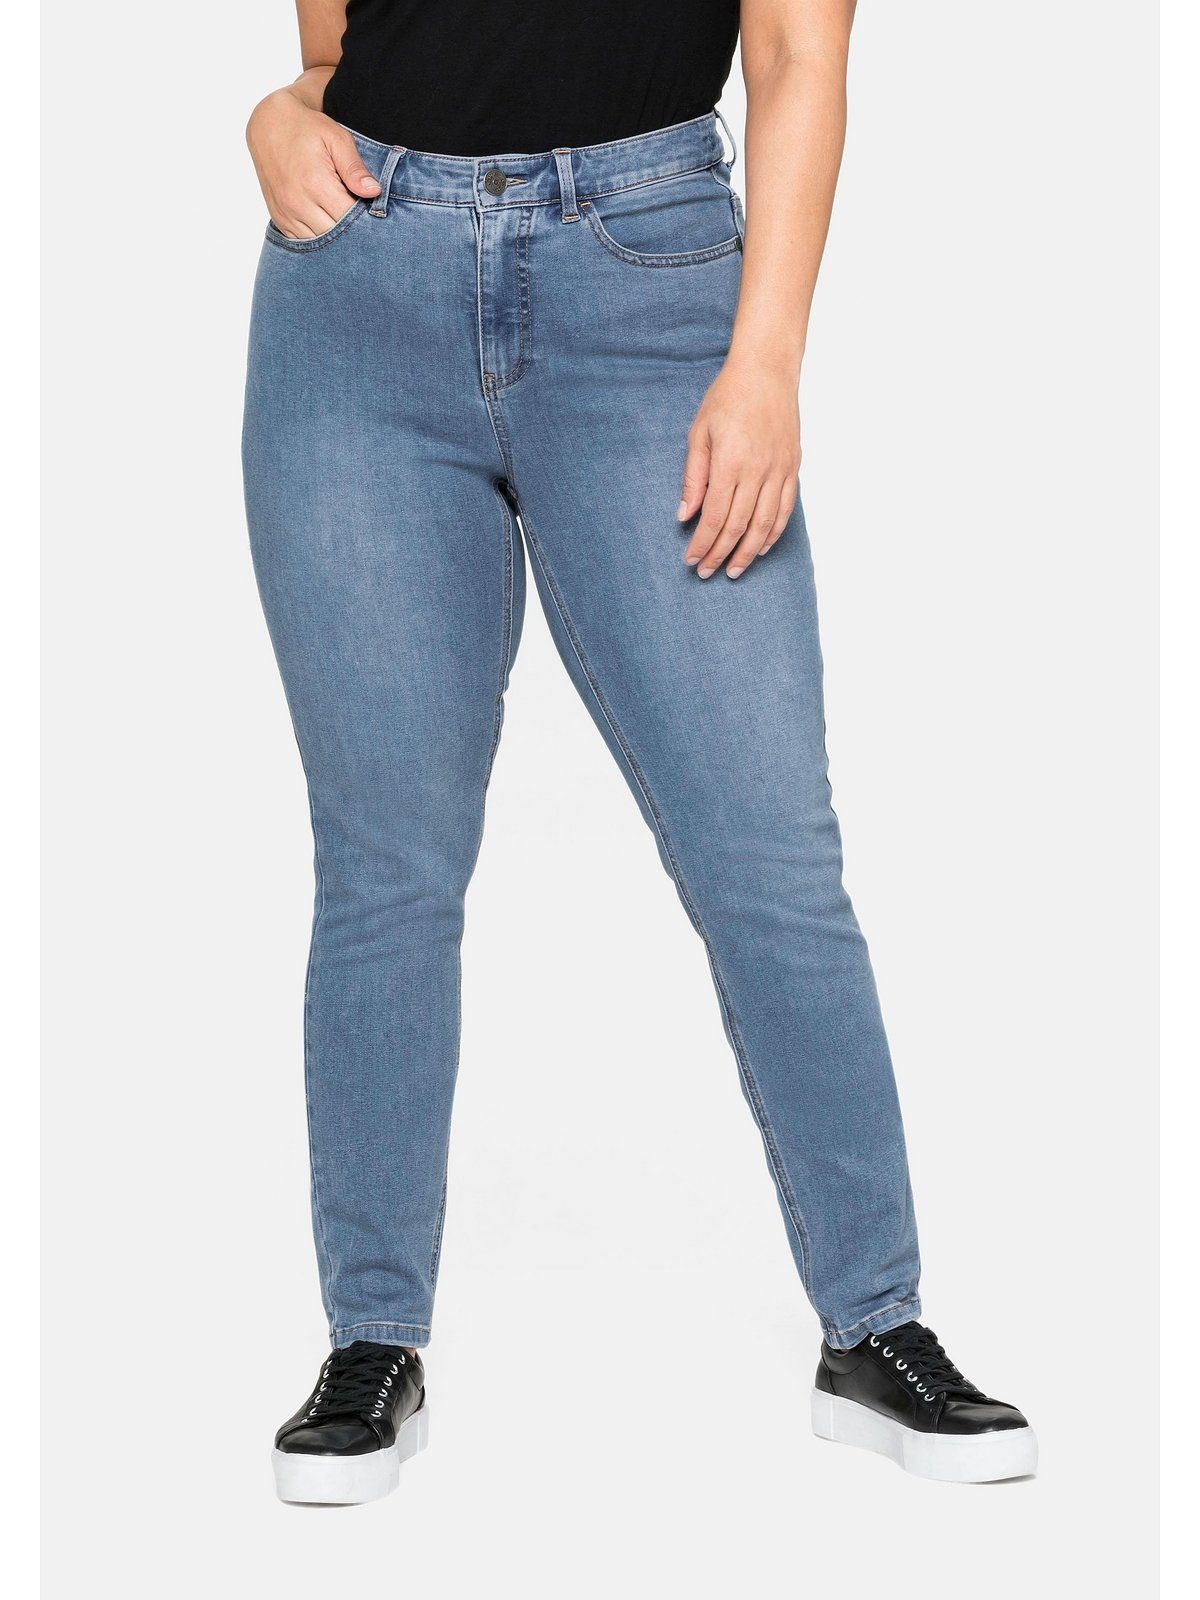 Sheego Stretch-Jeans »Jeans« Super elastisches Power-Stretch-Material